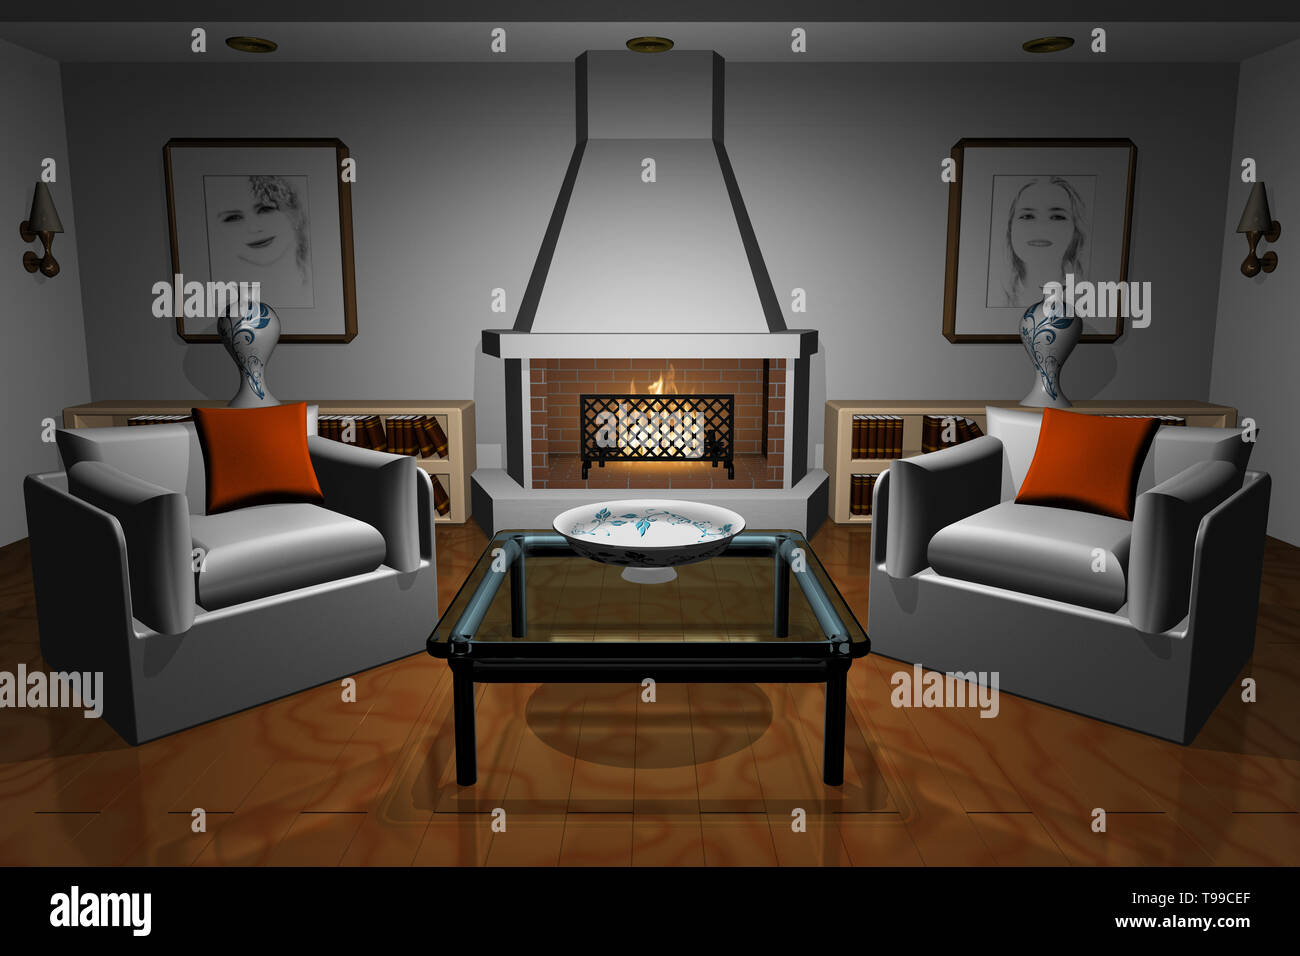 3d Illustration House Inside The Living Room With Fireplace